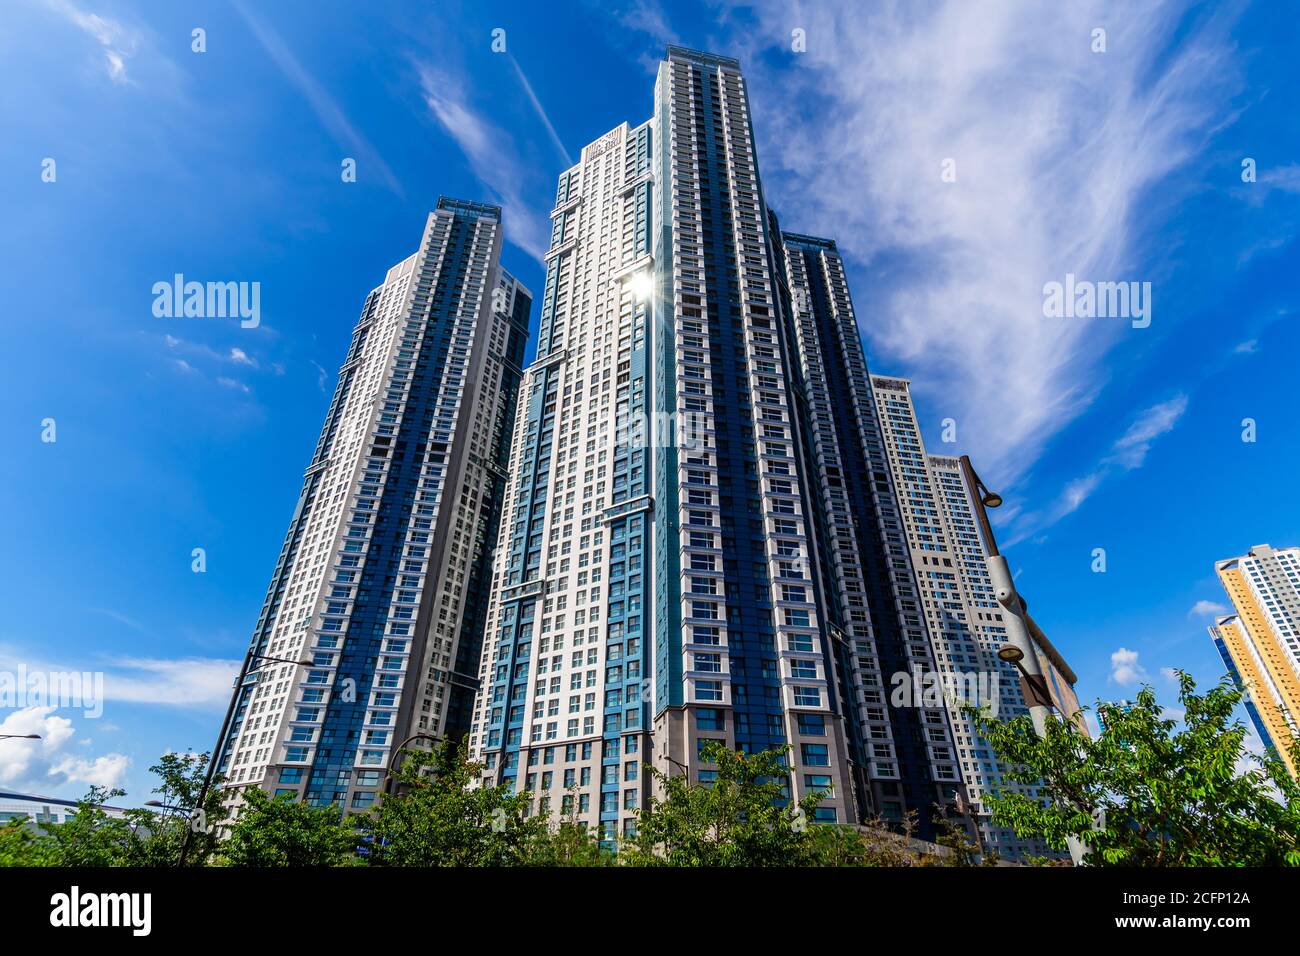 Luxury apartment and office tower called The Sharp. Near the Kintex area of Goyang, South Korea. Stock Photo